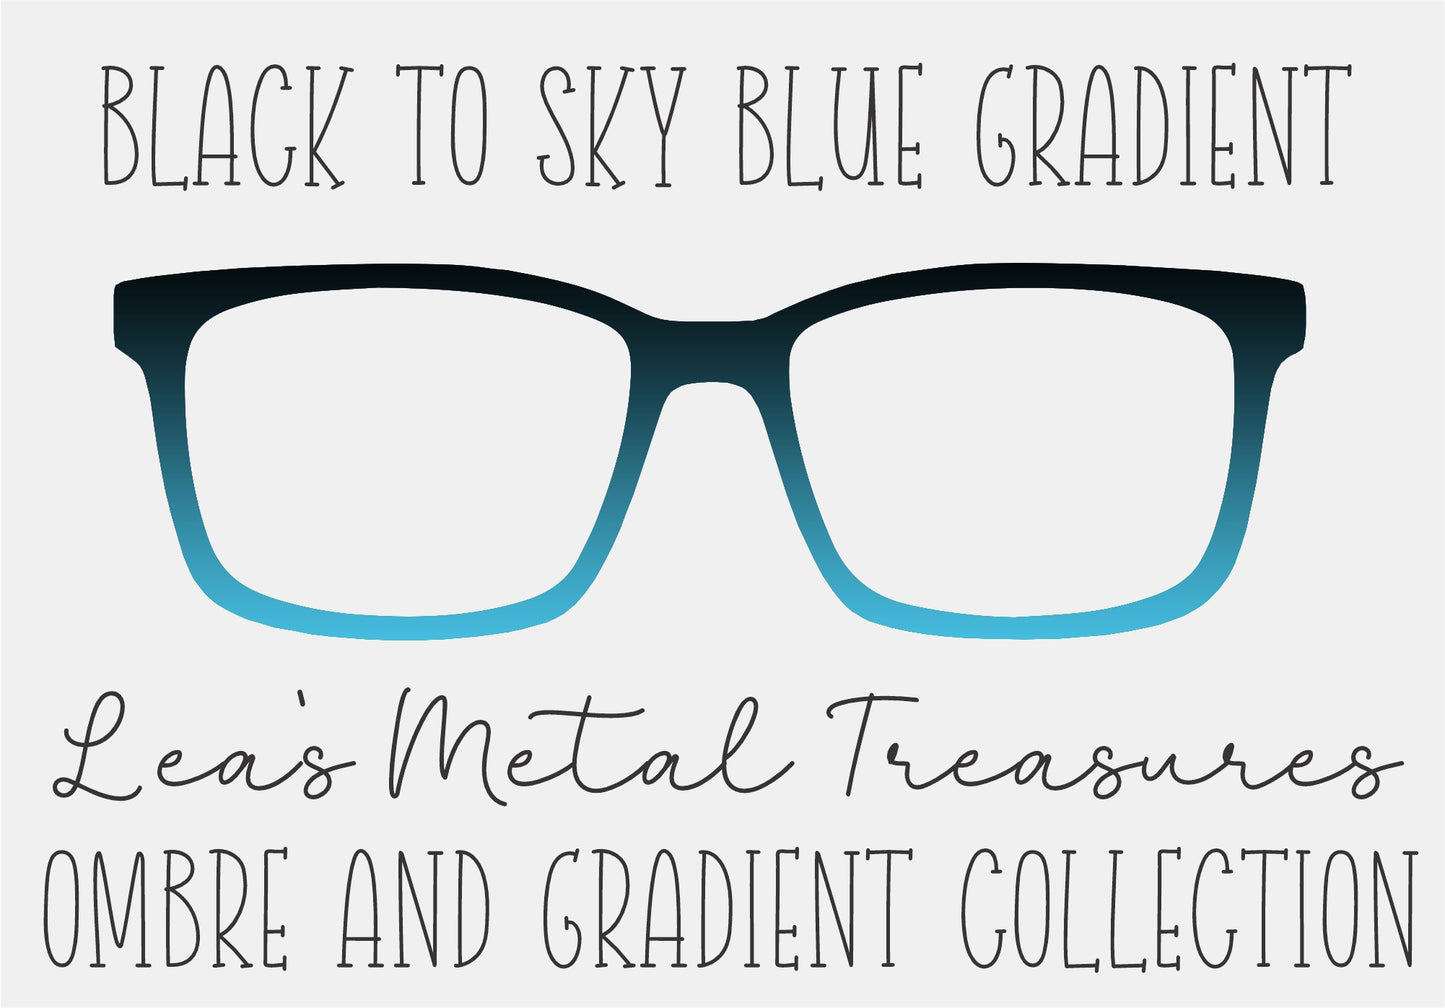 BLACK TO SKY BLUE GRADIENT Eyewear Frame Toppers COMES WITH MAGNETS